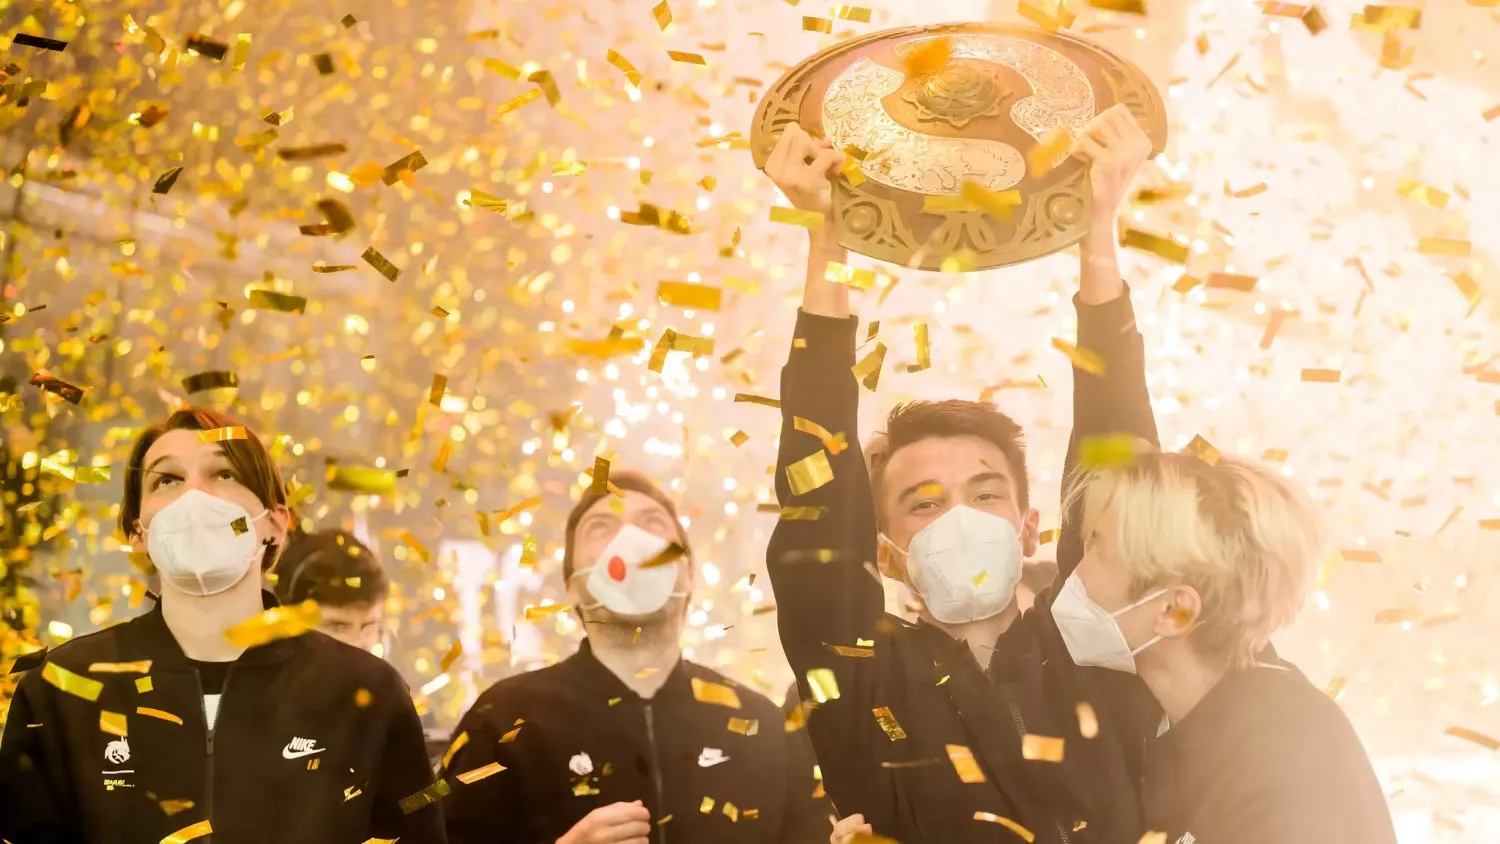 Team Spirit holding the T1 trophy as confetti rains down on them.